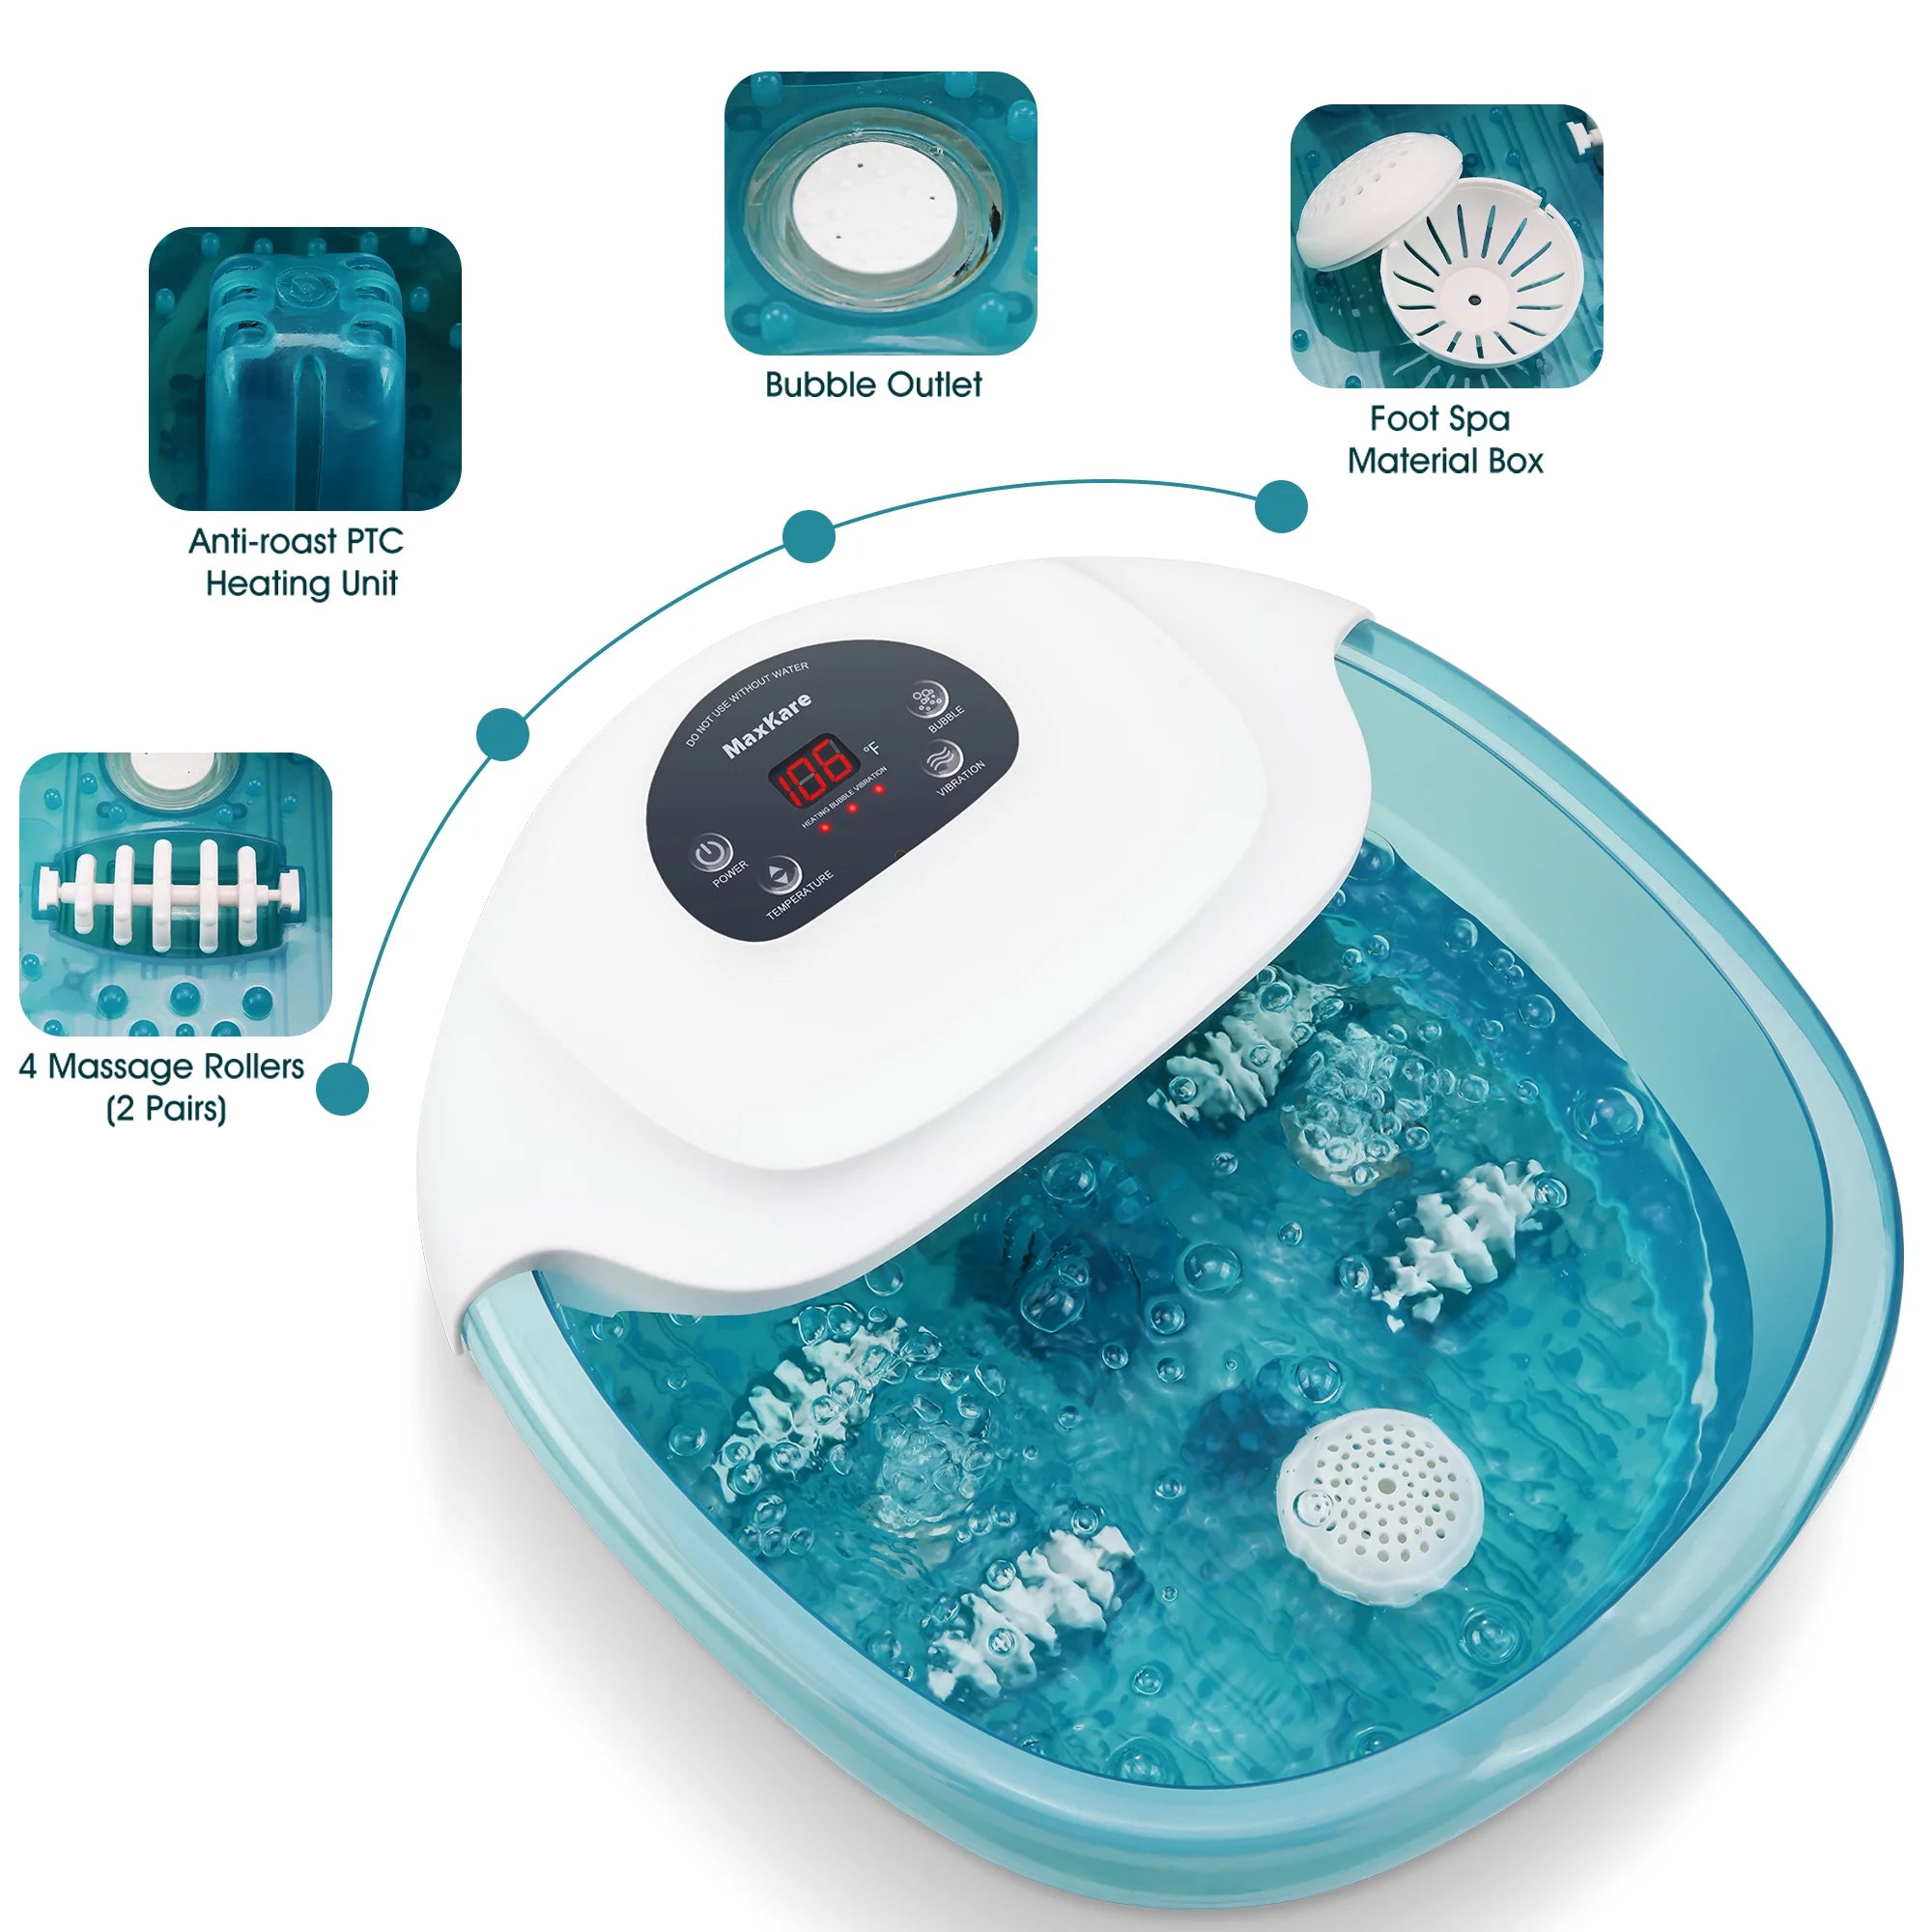 Load image into Gallery viewer, Foot Spa Bath Massager with Heat, Bubbles, and Vibration
